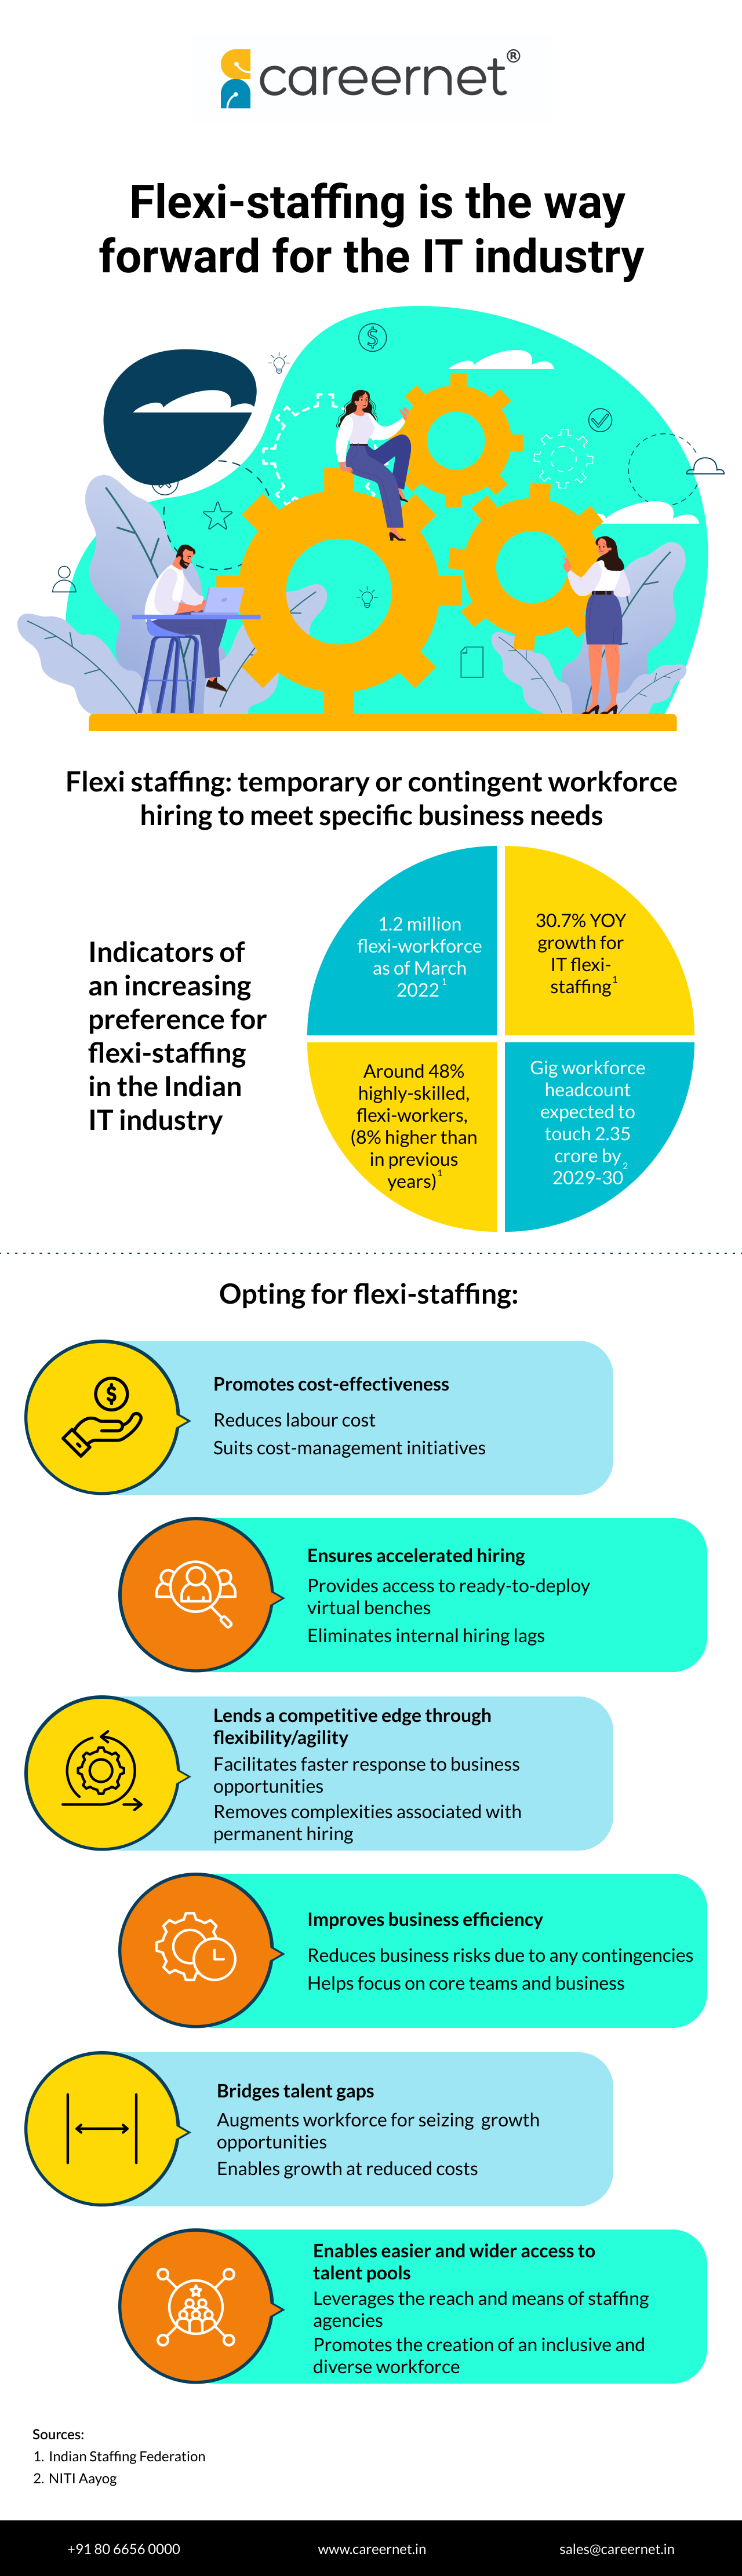 Flexi-staffing is the way forward for the IT industry
